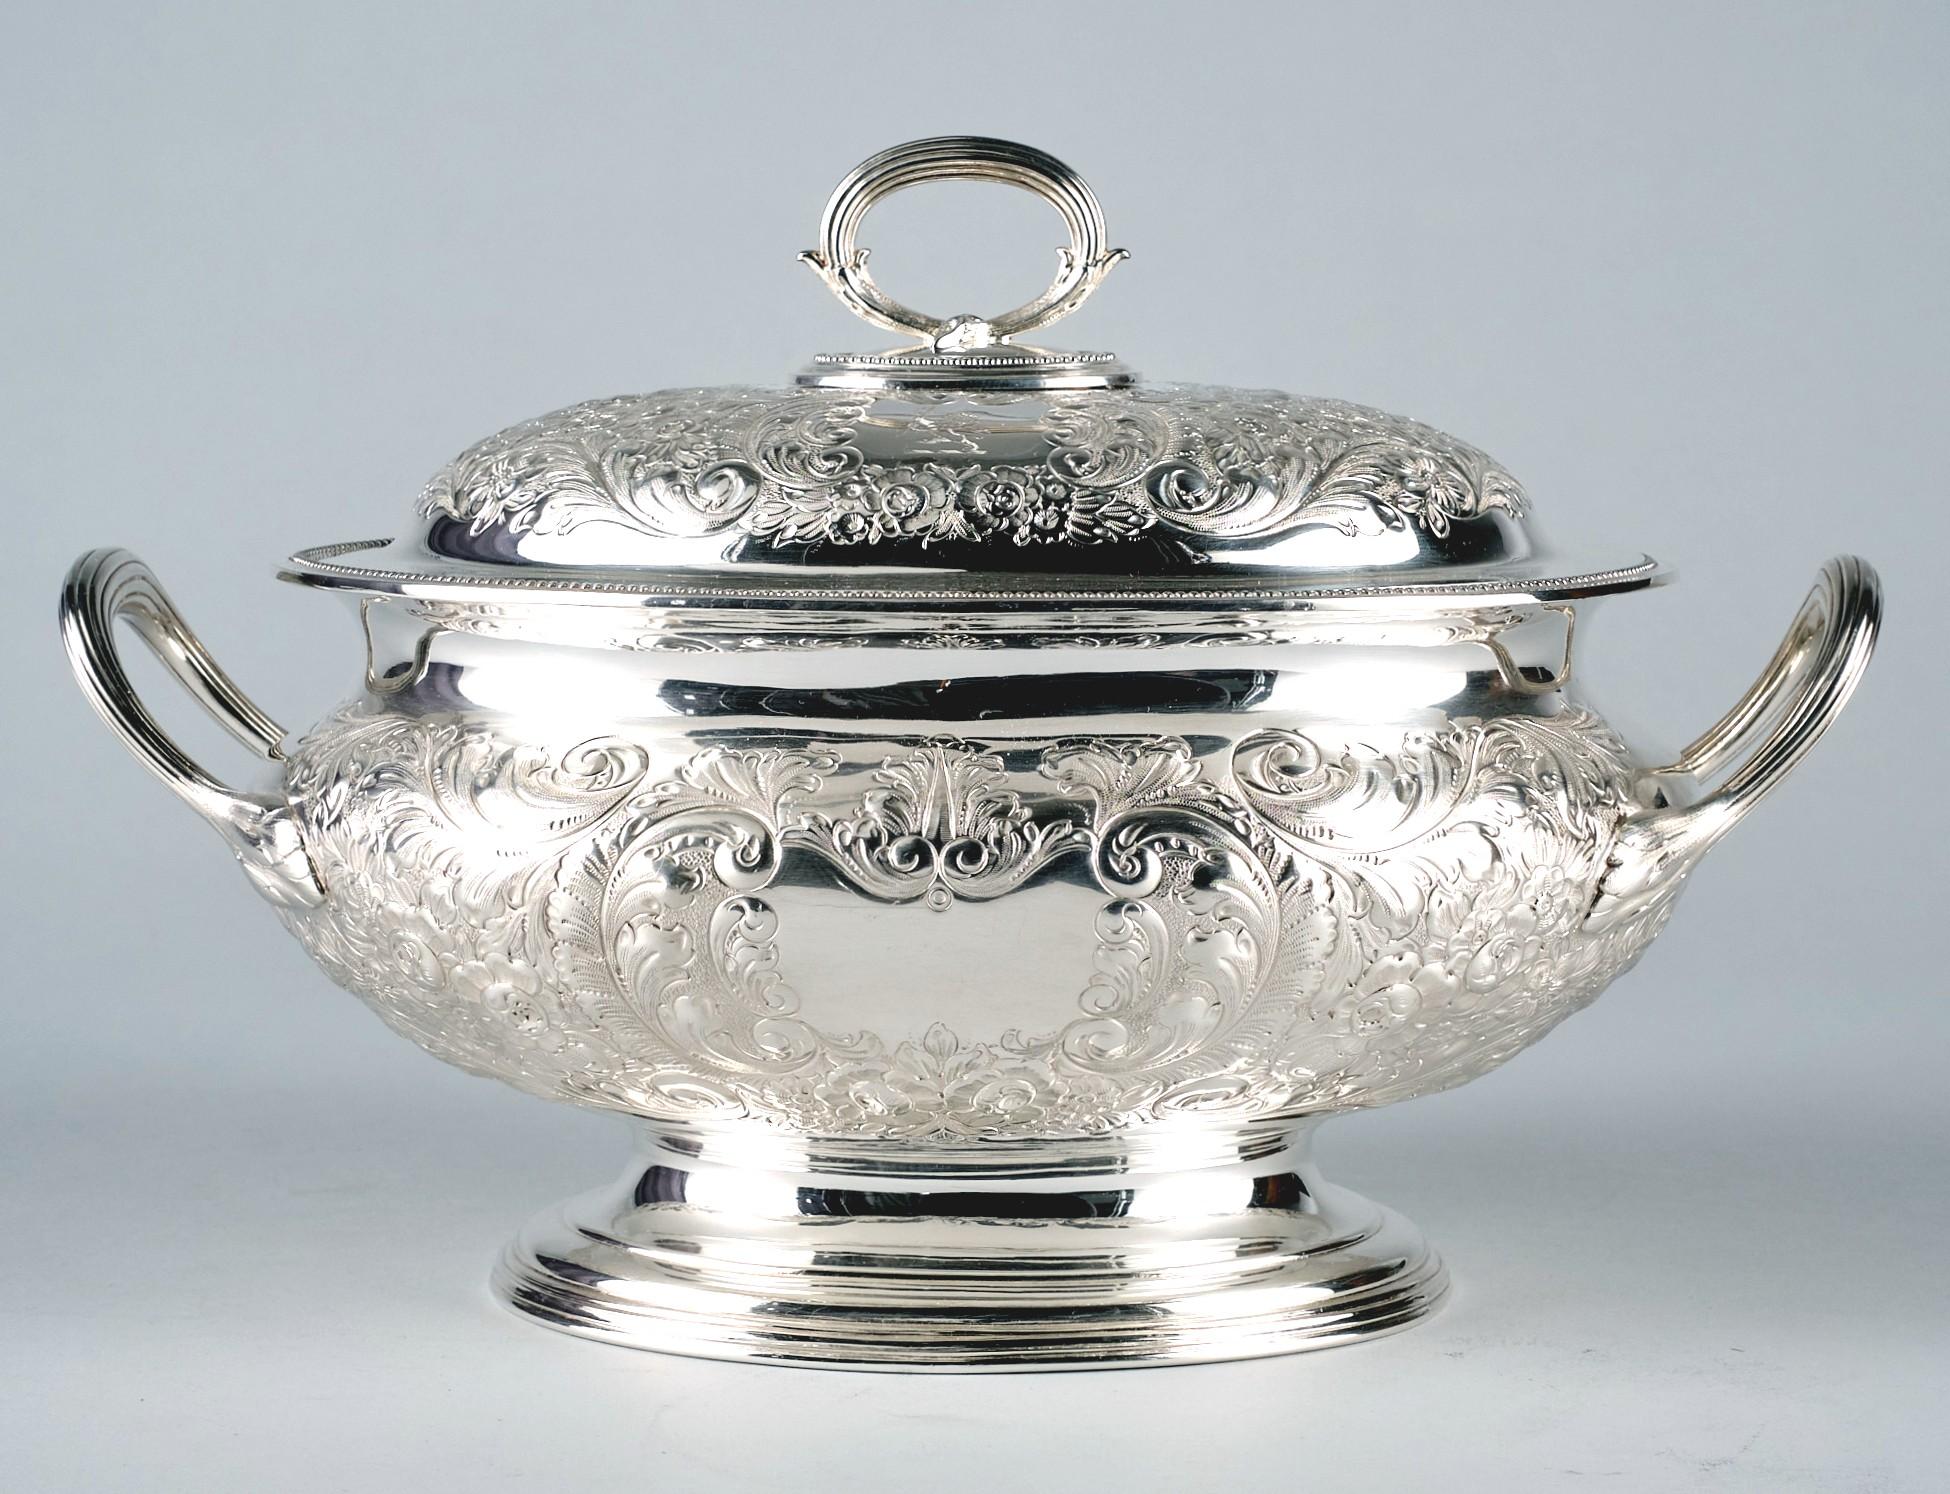 A very fine & impressively large silver plated soup tureen by Elkington & Company of London with a capacity to hold 4 quarts. 
The substantial oval body having open handles, richly decorated with embossed & engraved foliate motifs & centered by